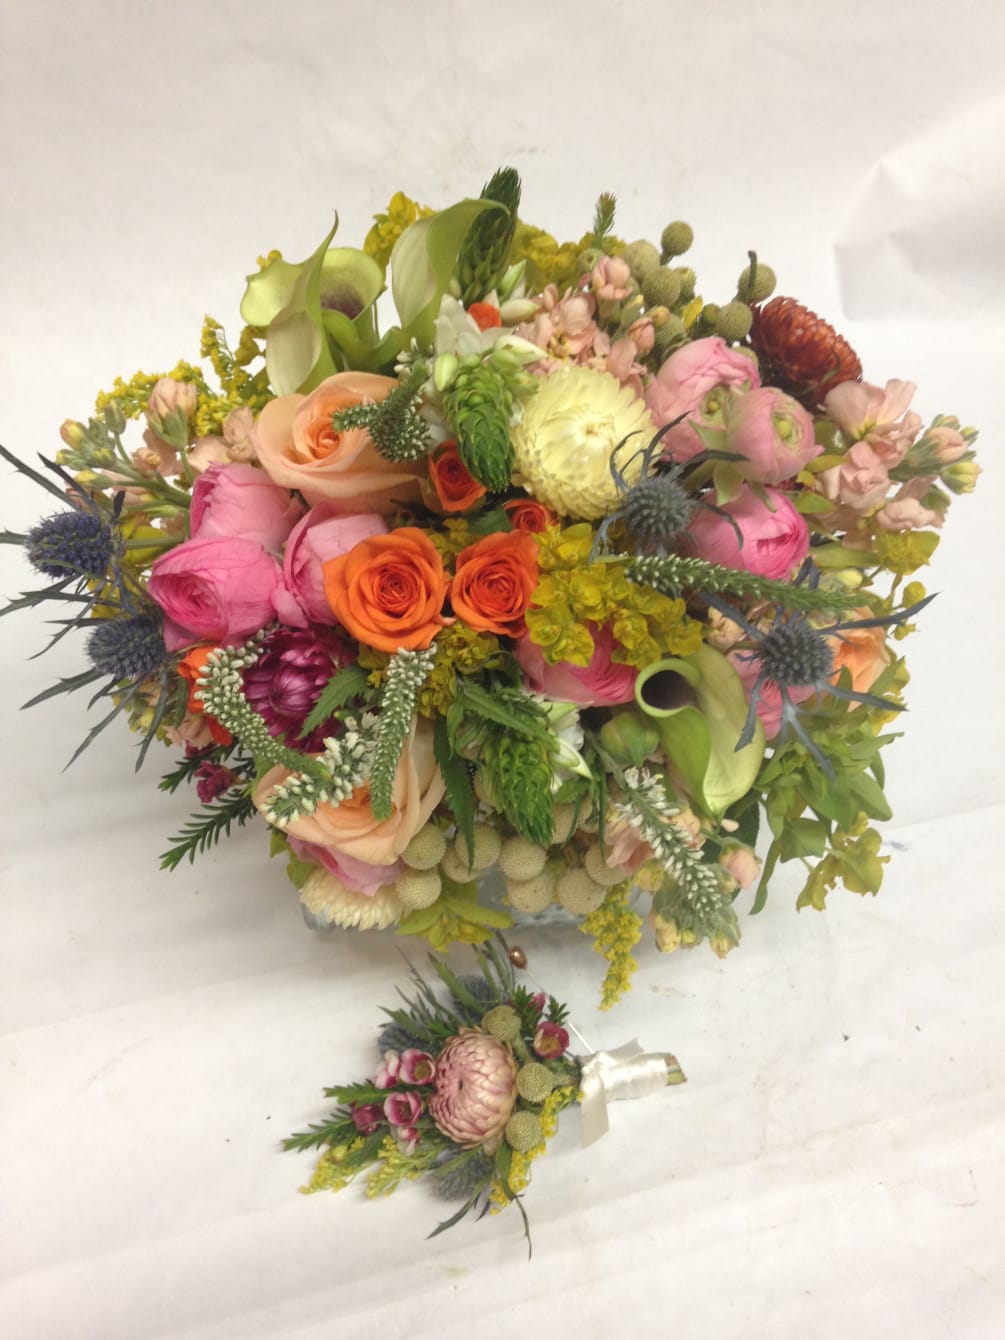 This bouquet and boutonniere is filled with sweet, fresh flowers with a